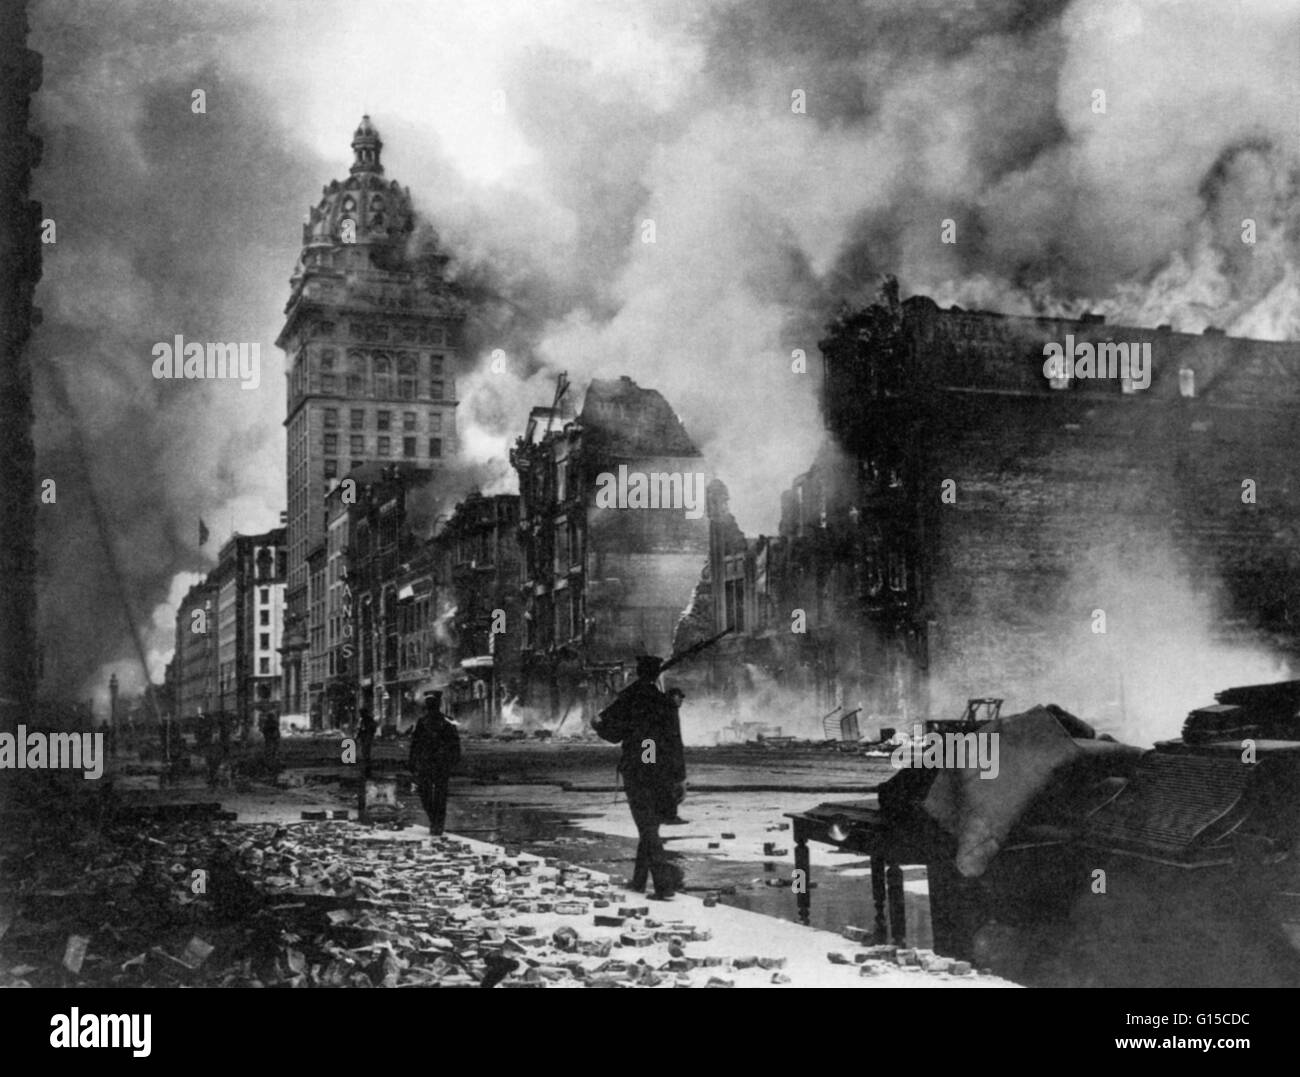 Troops from the Presidio walk east along Market Street after the San Francisco earthquake of 1906. Part of their mission was to protect private and public property as well as to assist police and firefighters. Smoke is billowing out of the tall Call Build Stock Photo